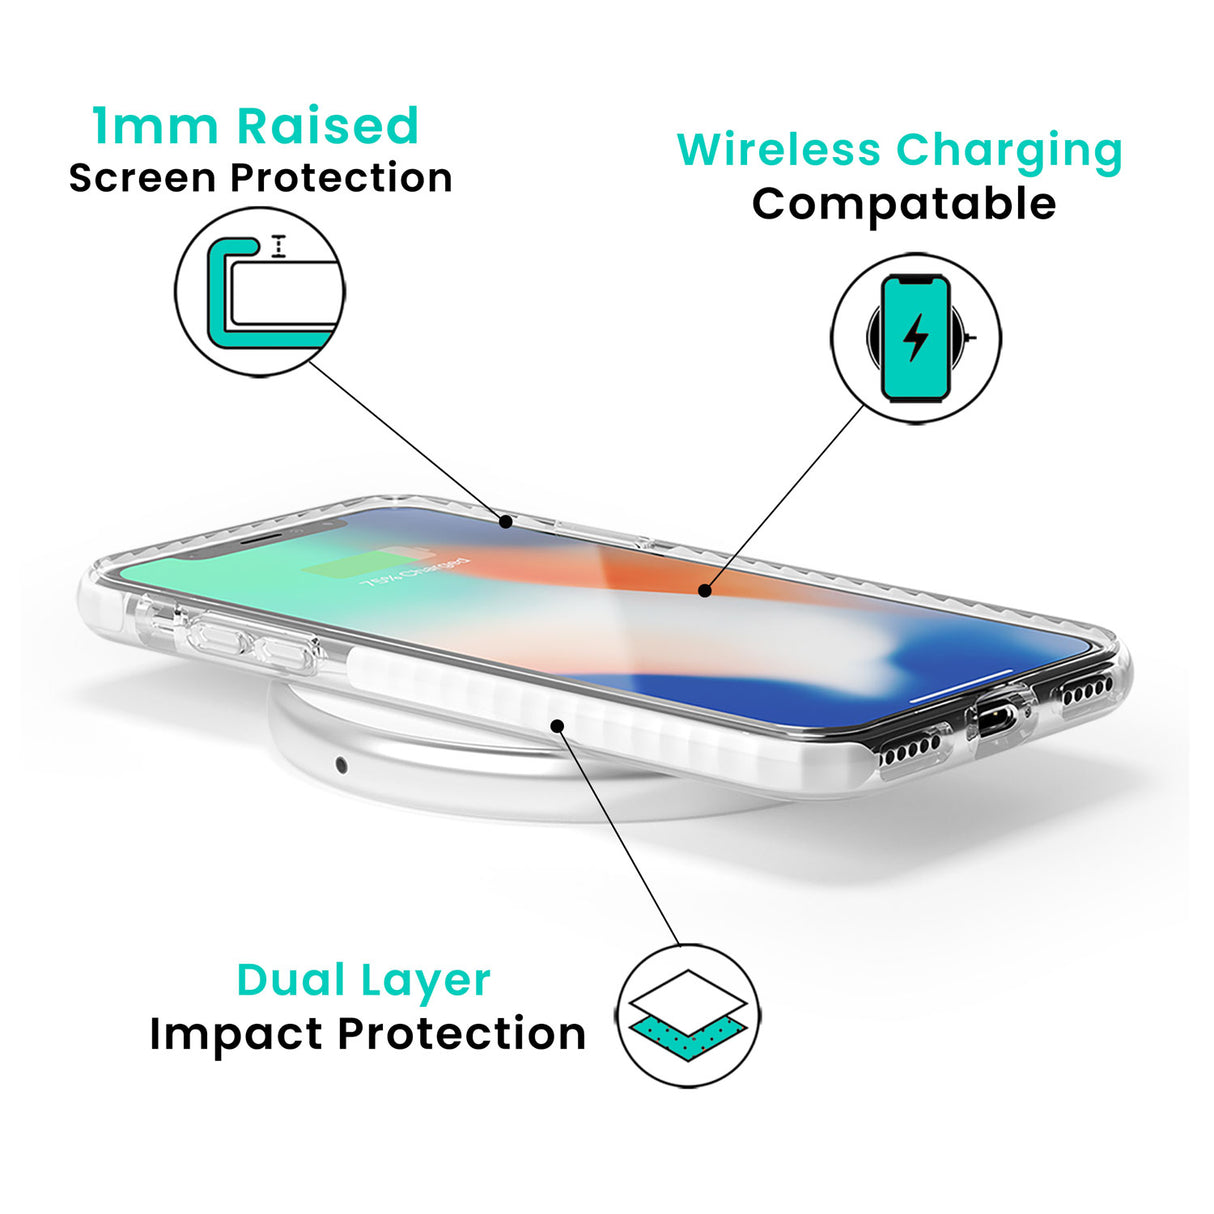 Wow, chill Impact Phone Case for iPhone X XS Max XR